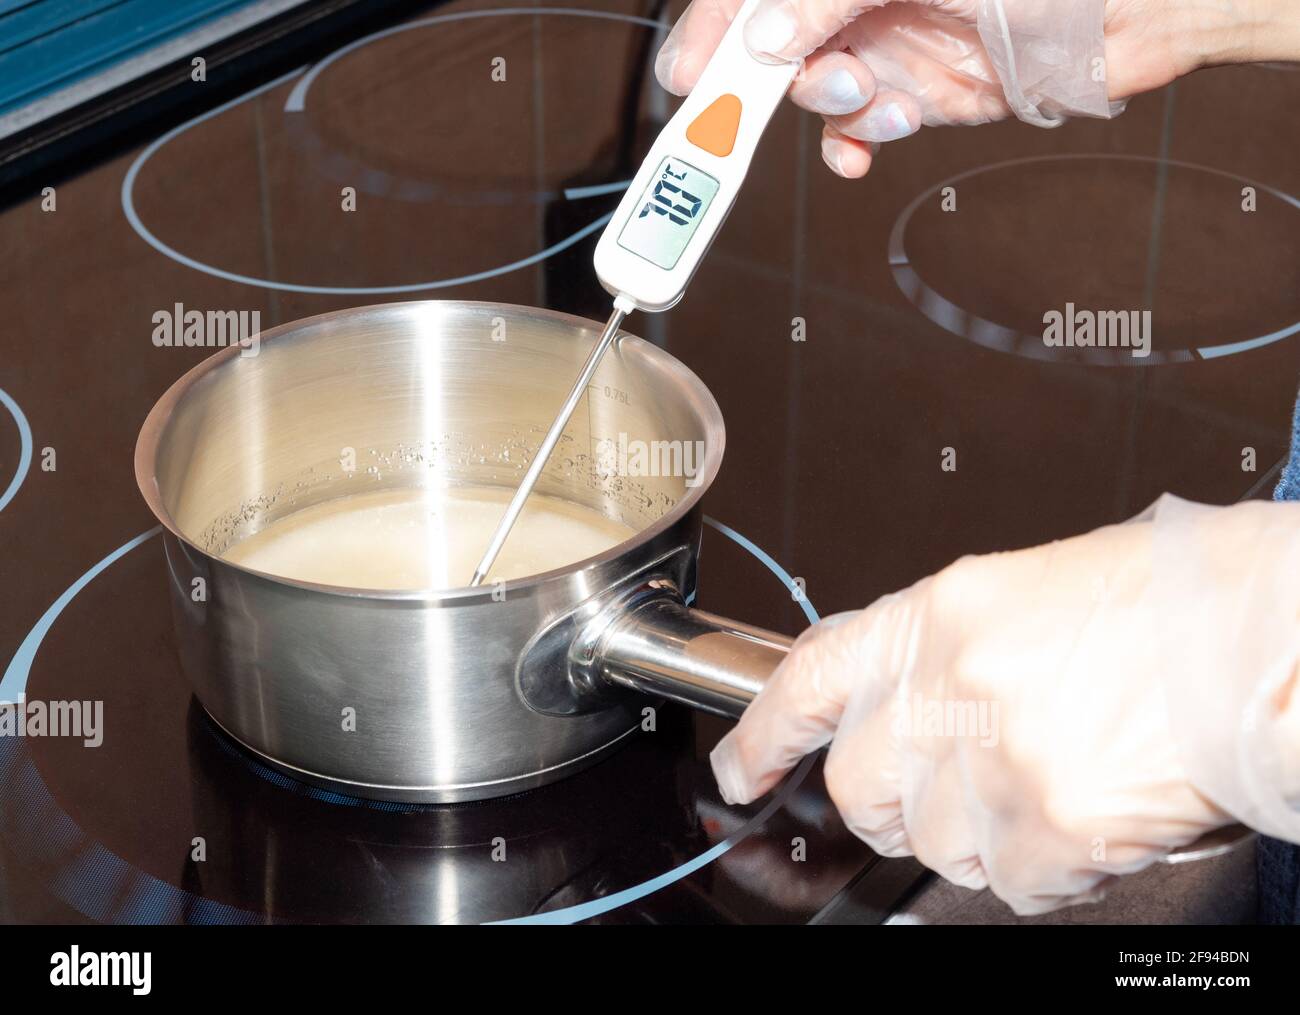 https://c8.alamy.com/comp/2F94BDN/the-temperature-of-the-boiling-syrup-in-the-pan-is-measured-with-an-electronic-thermometer-2F94BDN.jpg